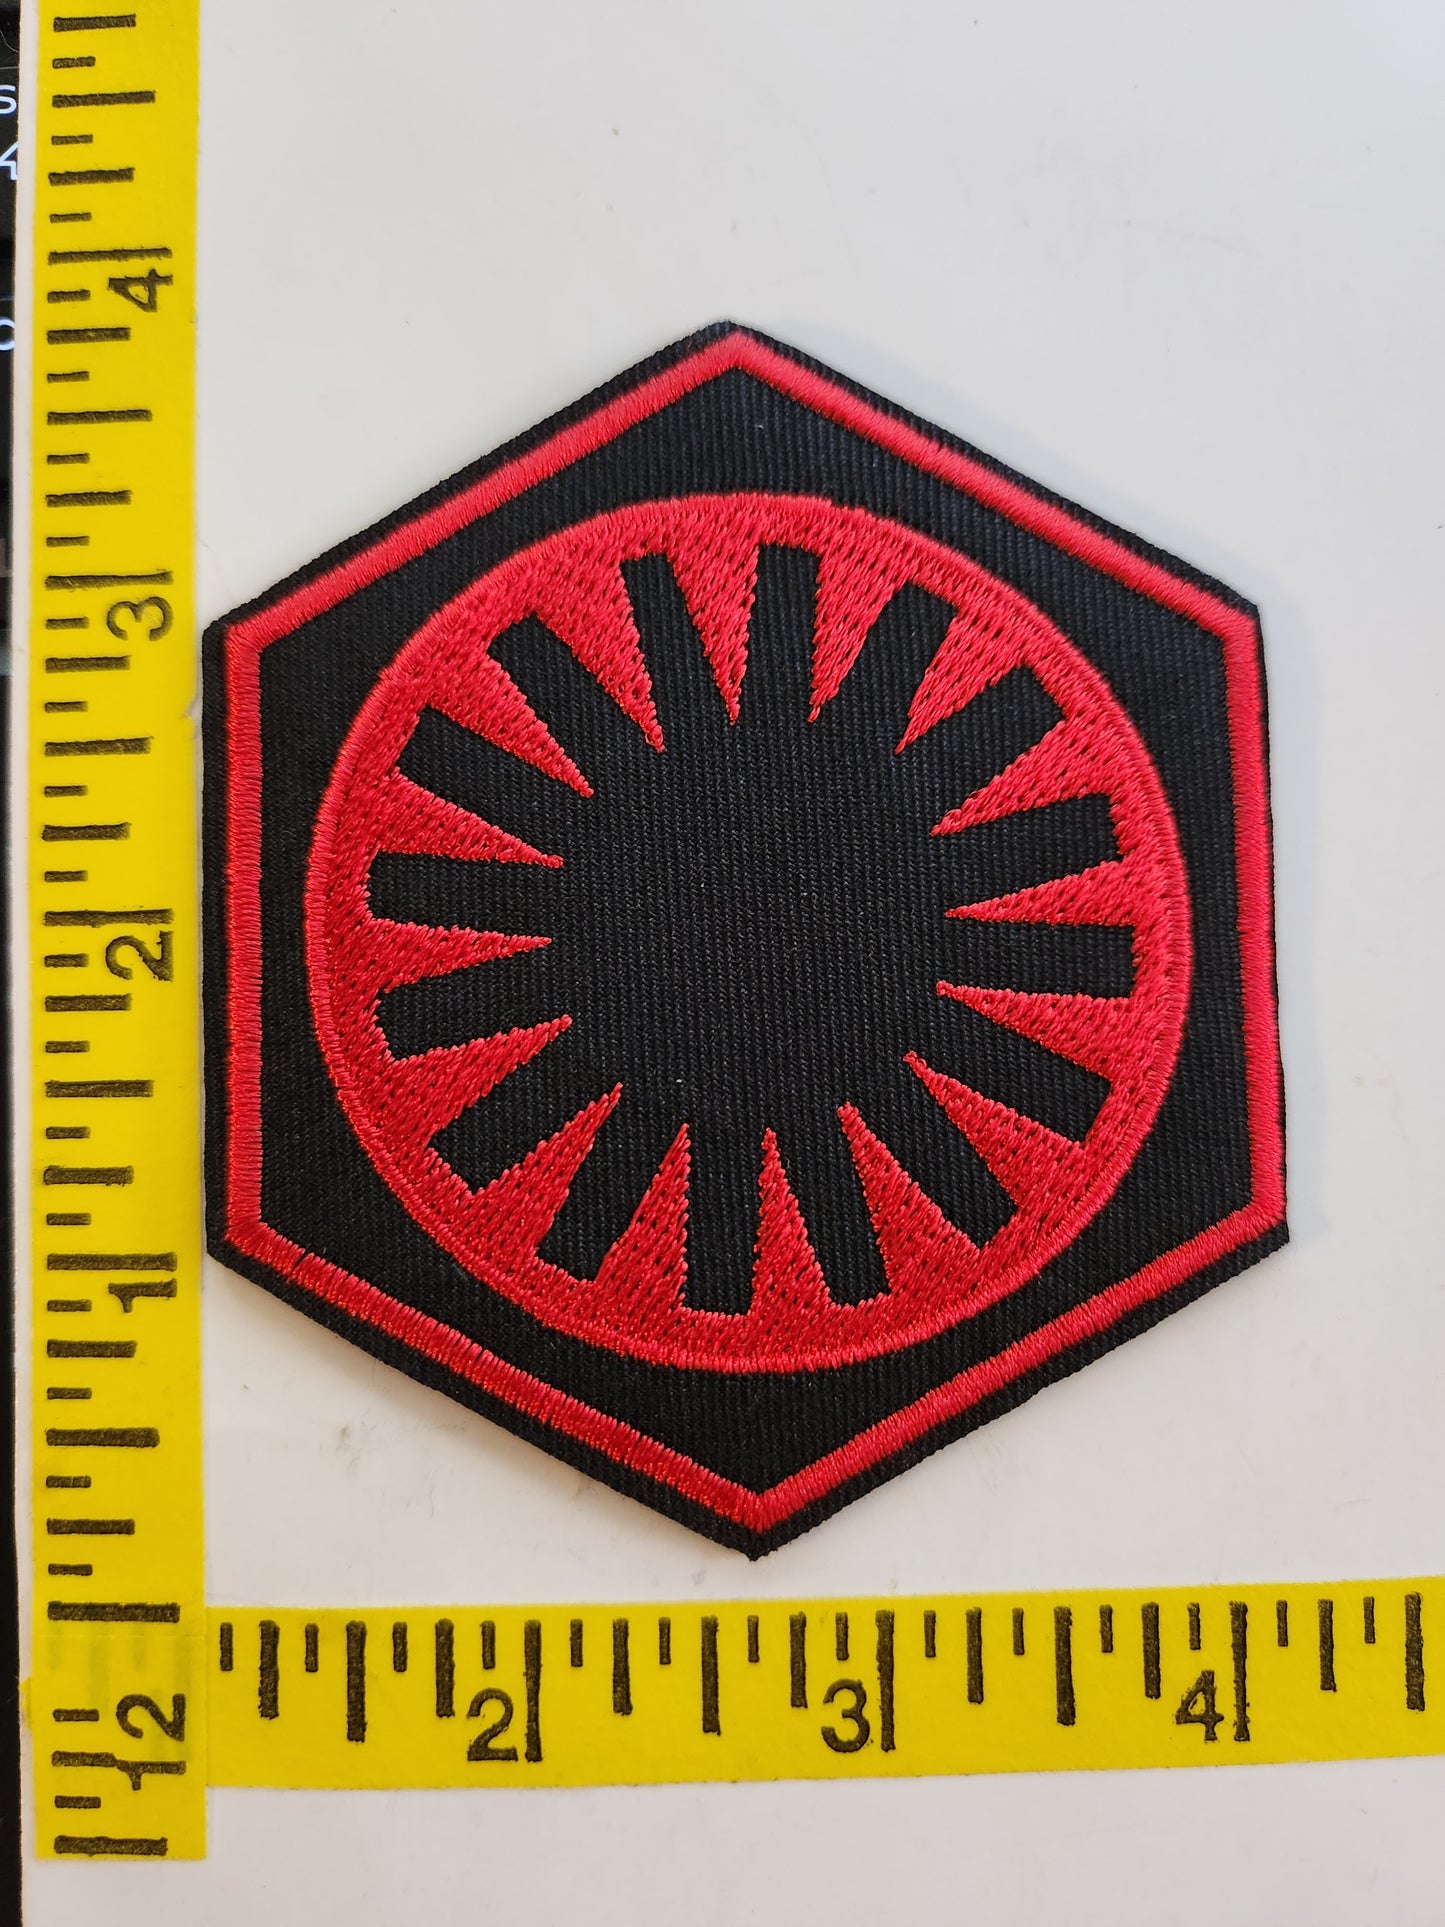 Star Wars First Order logo 3" Red & Black  Embroidered Patch, NEW 3inch roughly